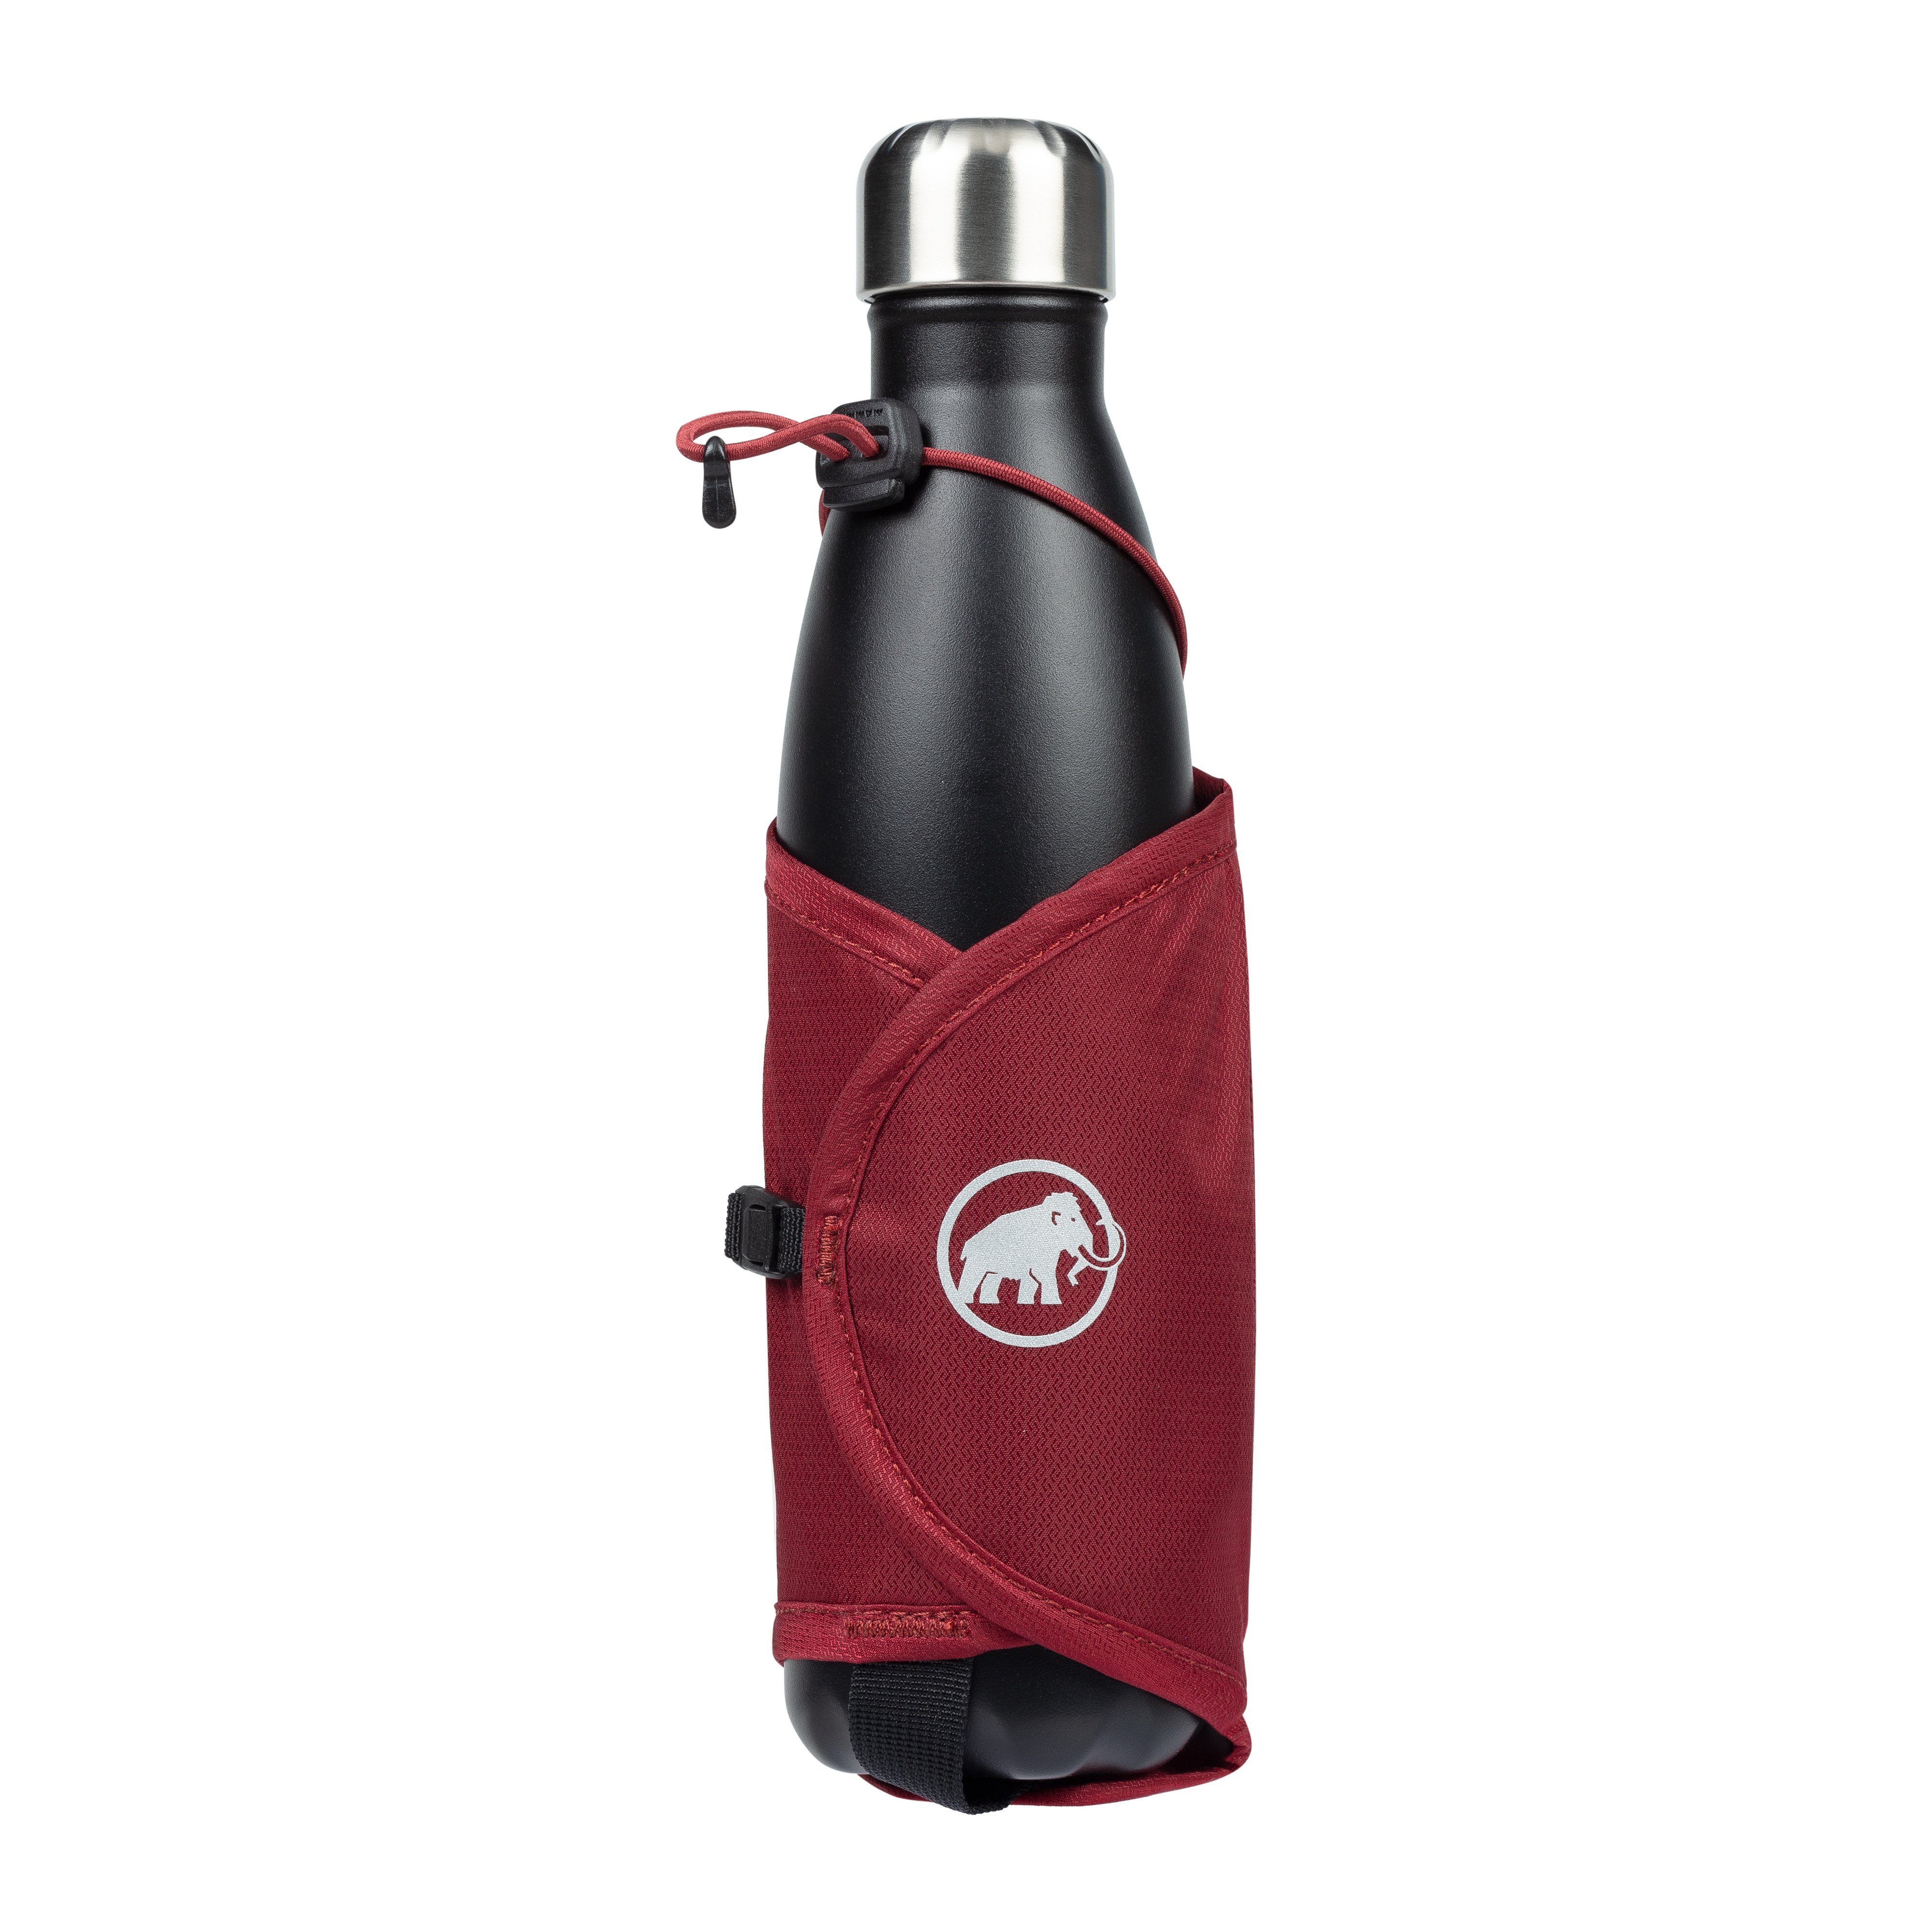 Lithium Add-on Bottle Holder - blood red, one size product image